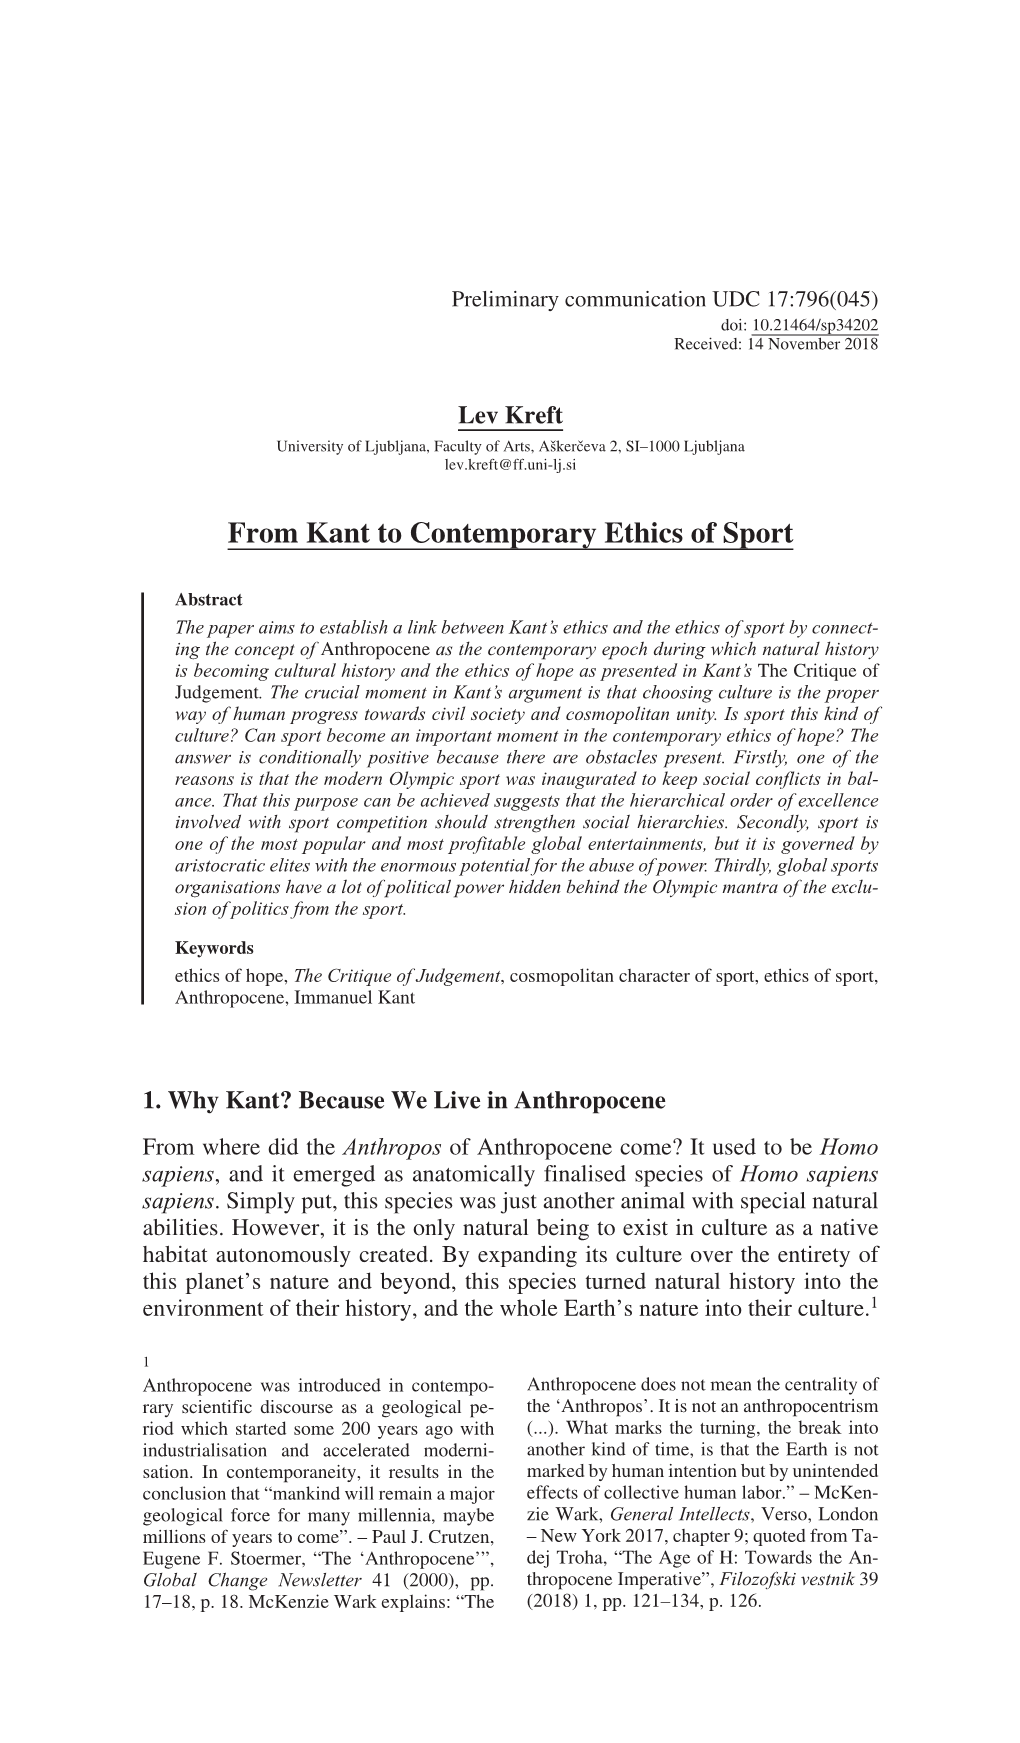 From Kant to Contemporary Ethics of Sport